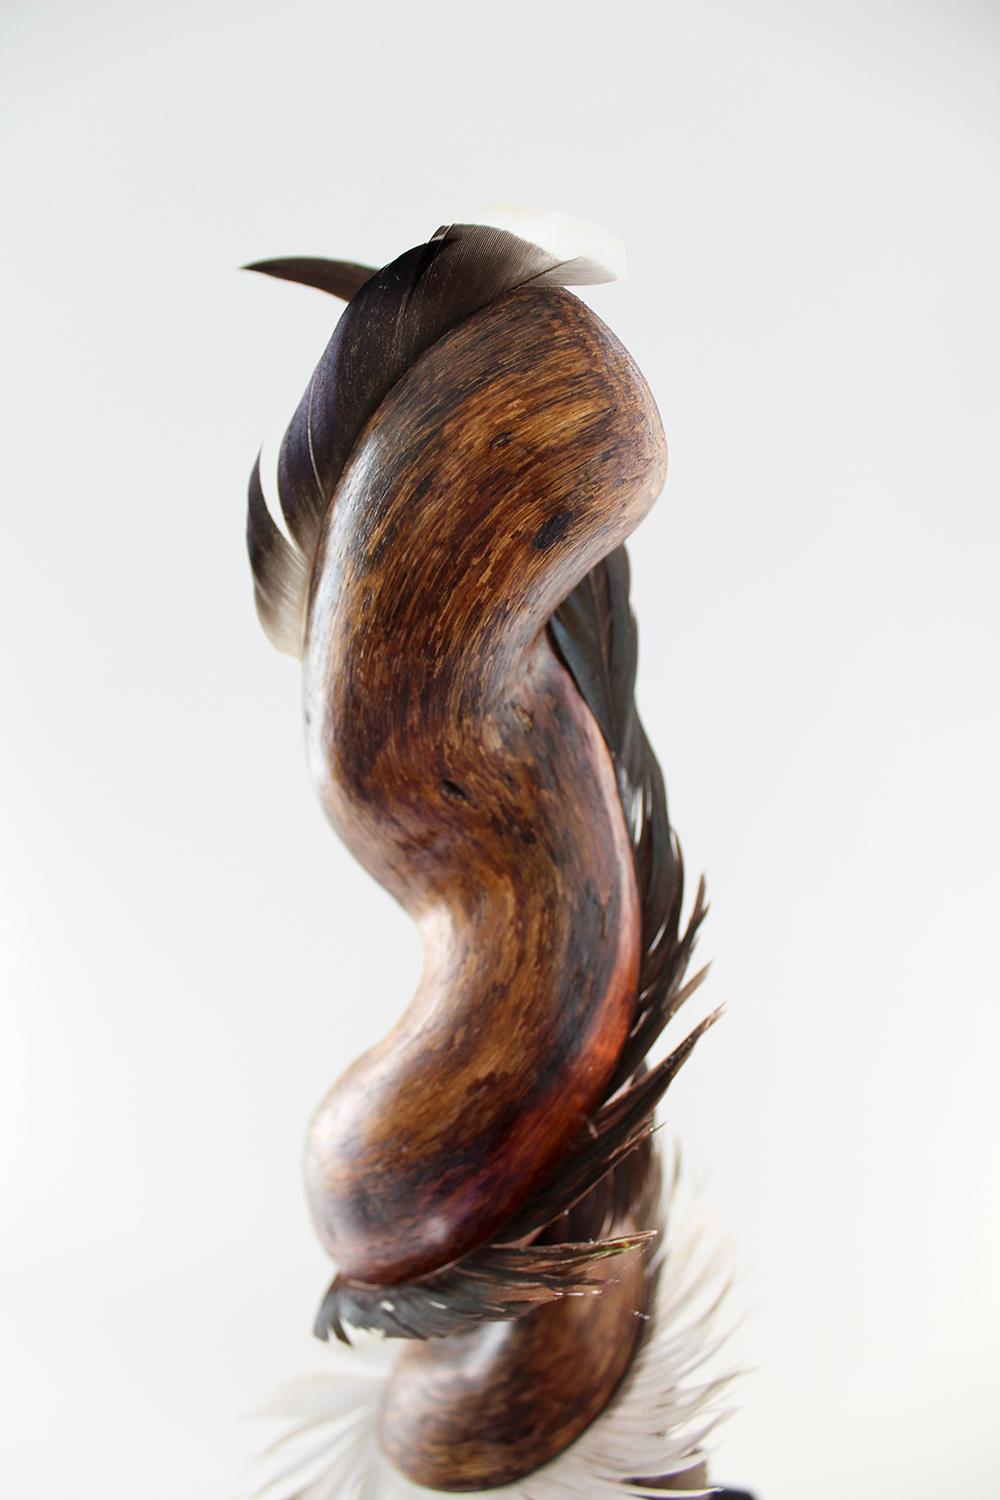 Miller Opie’s “Swishing Larkspur” is a gestural 27 x 6 x 6 inch White Oak wood sculpture with found feather details embedded into the wooden grain. It is the fifth piece in her 8 piece 